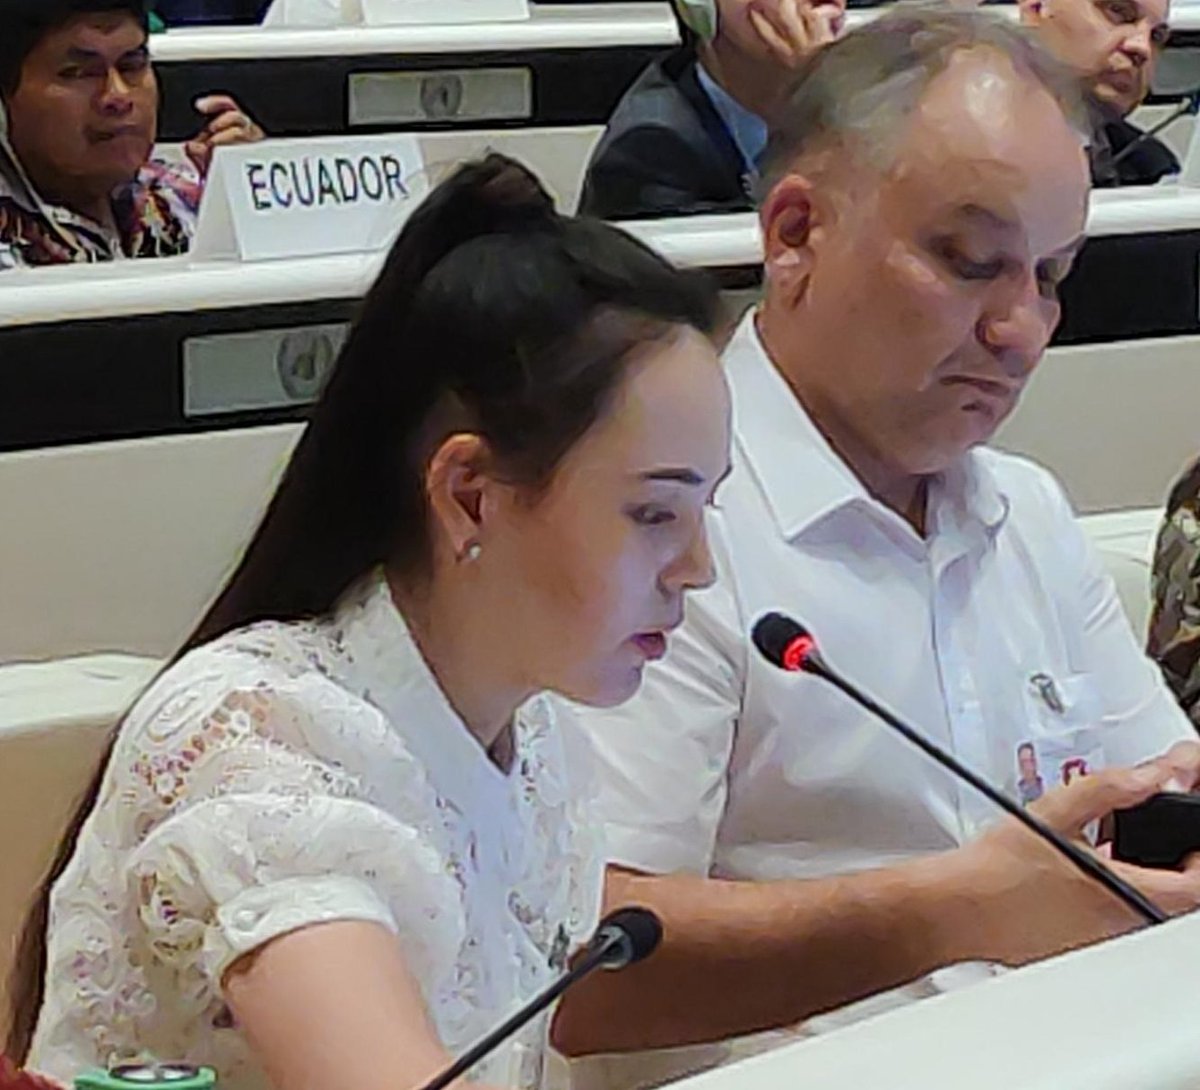 Lyudmila Korotkykh from the Crimean Tatar Youth Center about the experience of the #indigenous #CrimeanTatars during russia's genocidal war and #EMRIP's failure to include accurate information on it in its study on militarization @INFOEeV @GfbV @gfbv_ch @iwgia